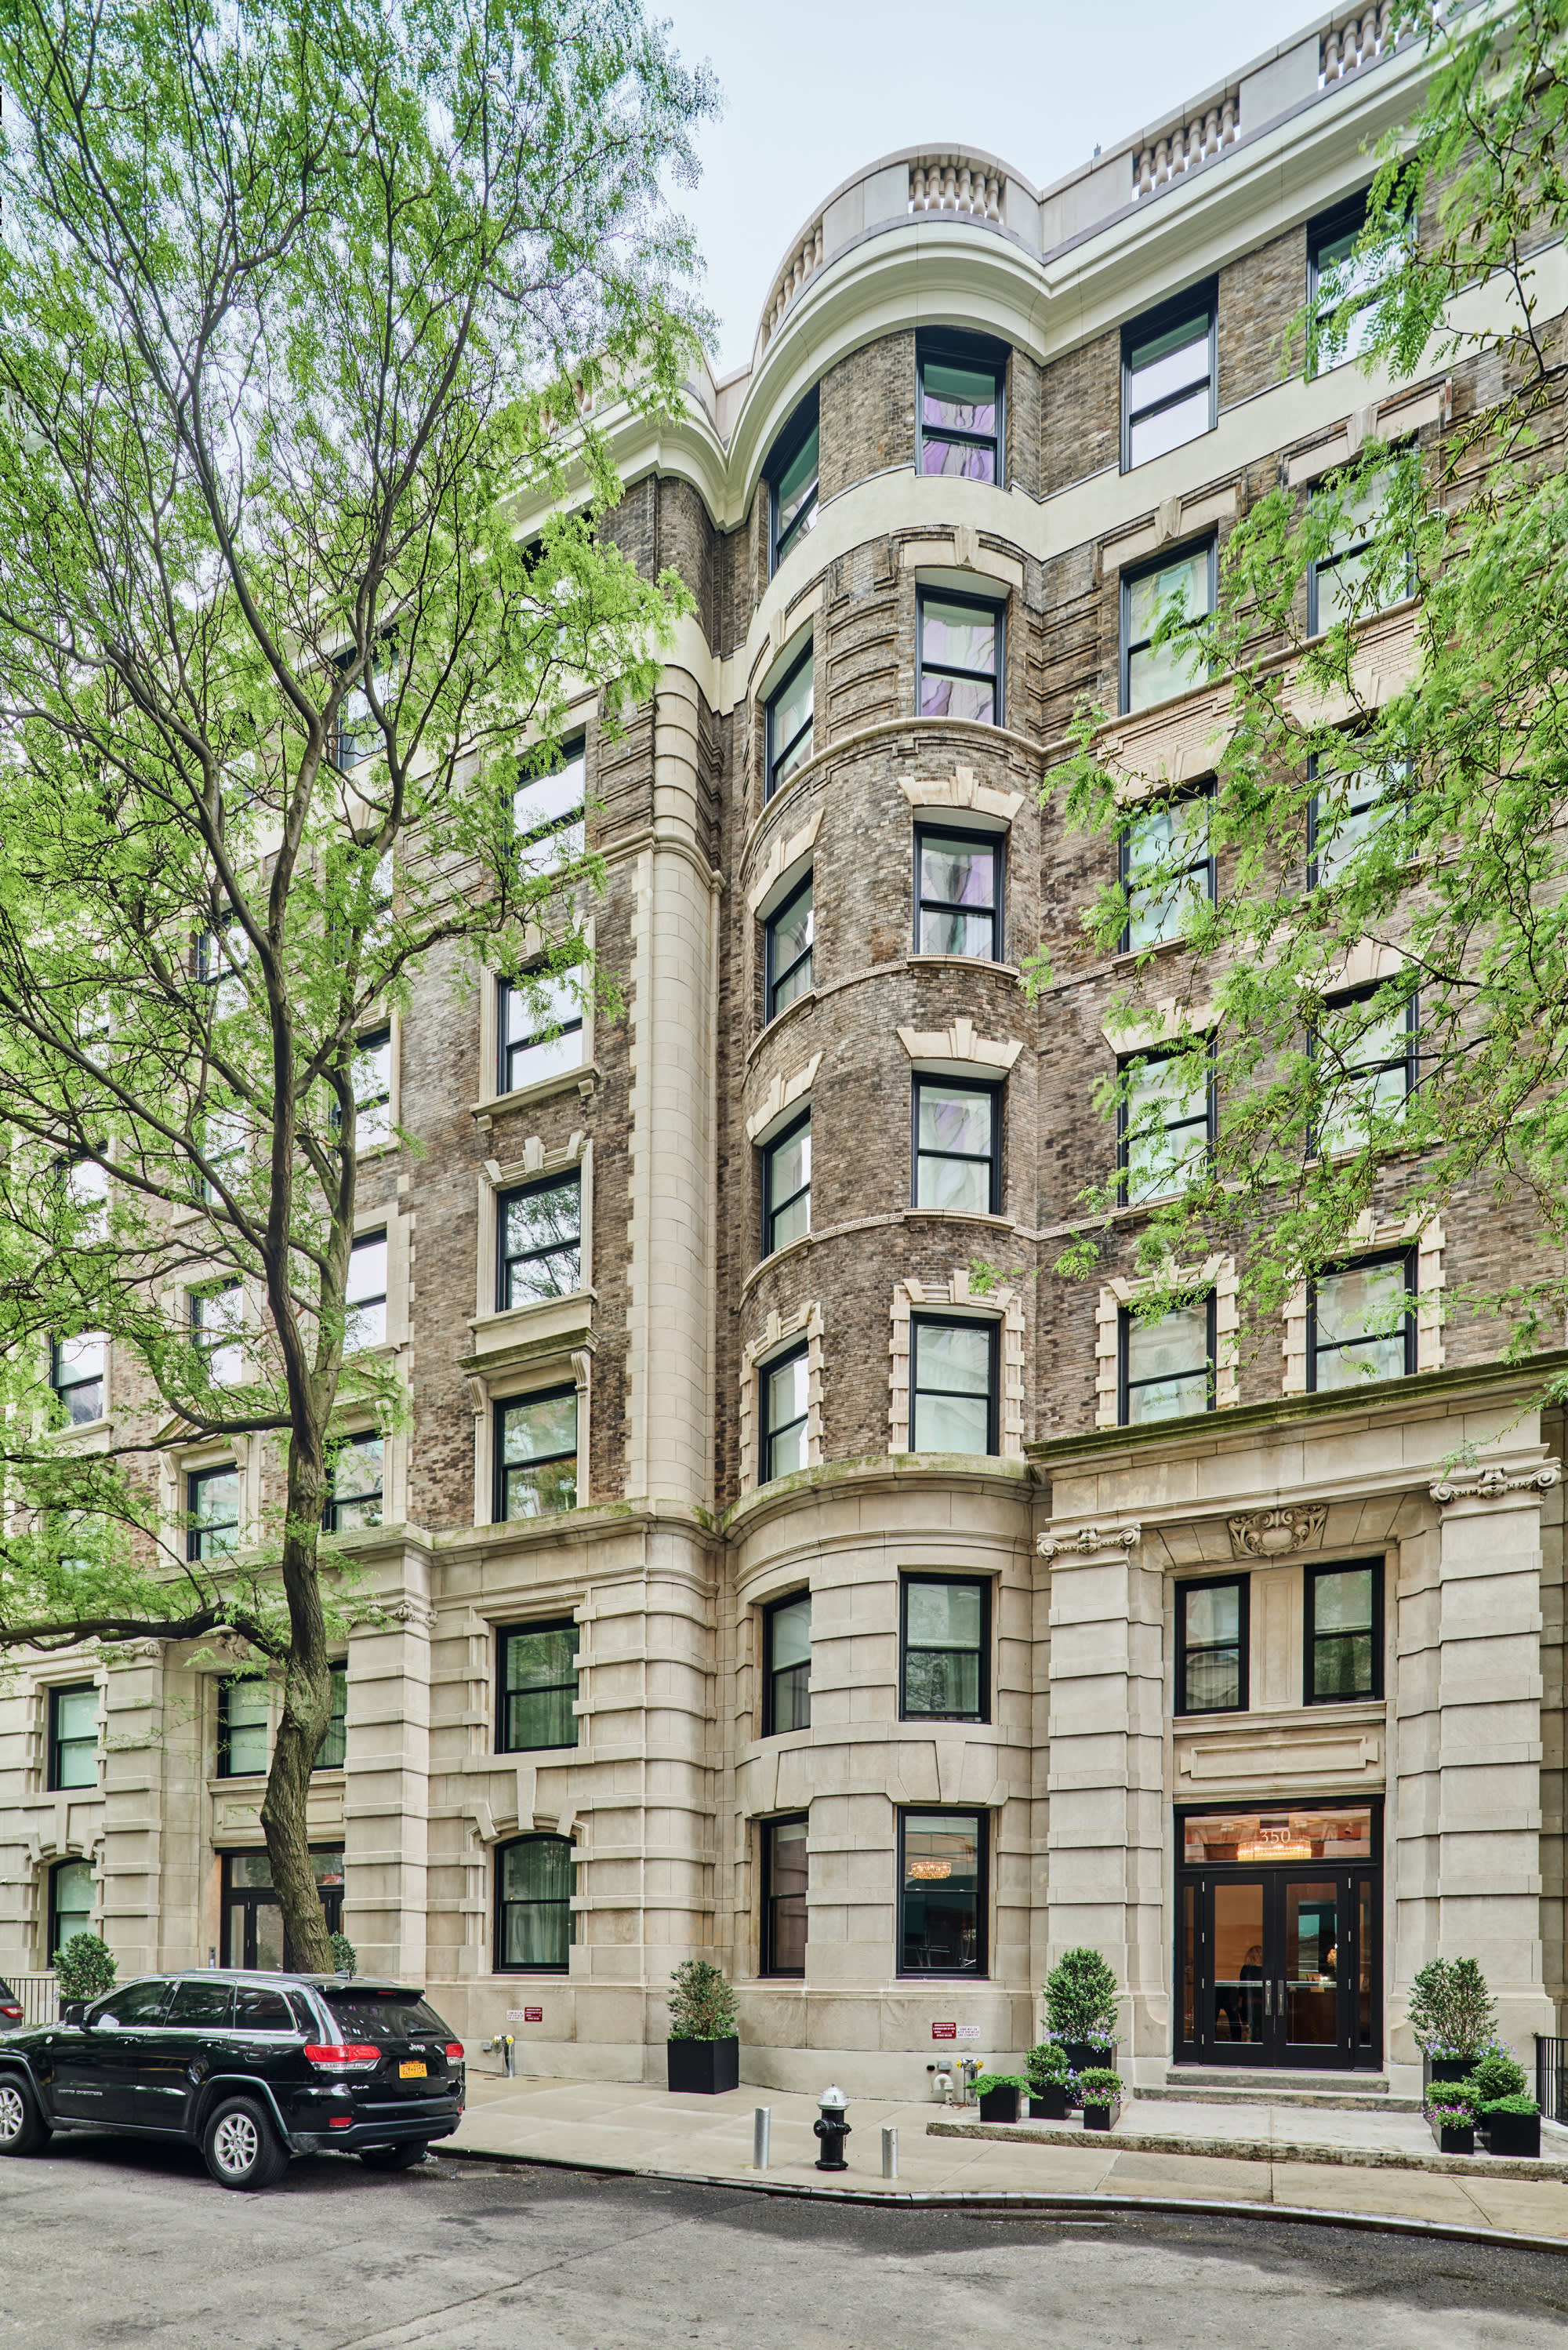 One of the Upper West Side’s historic districts gets  a new boutique condo